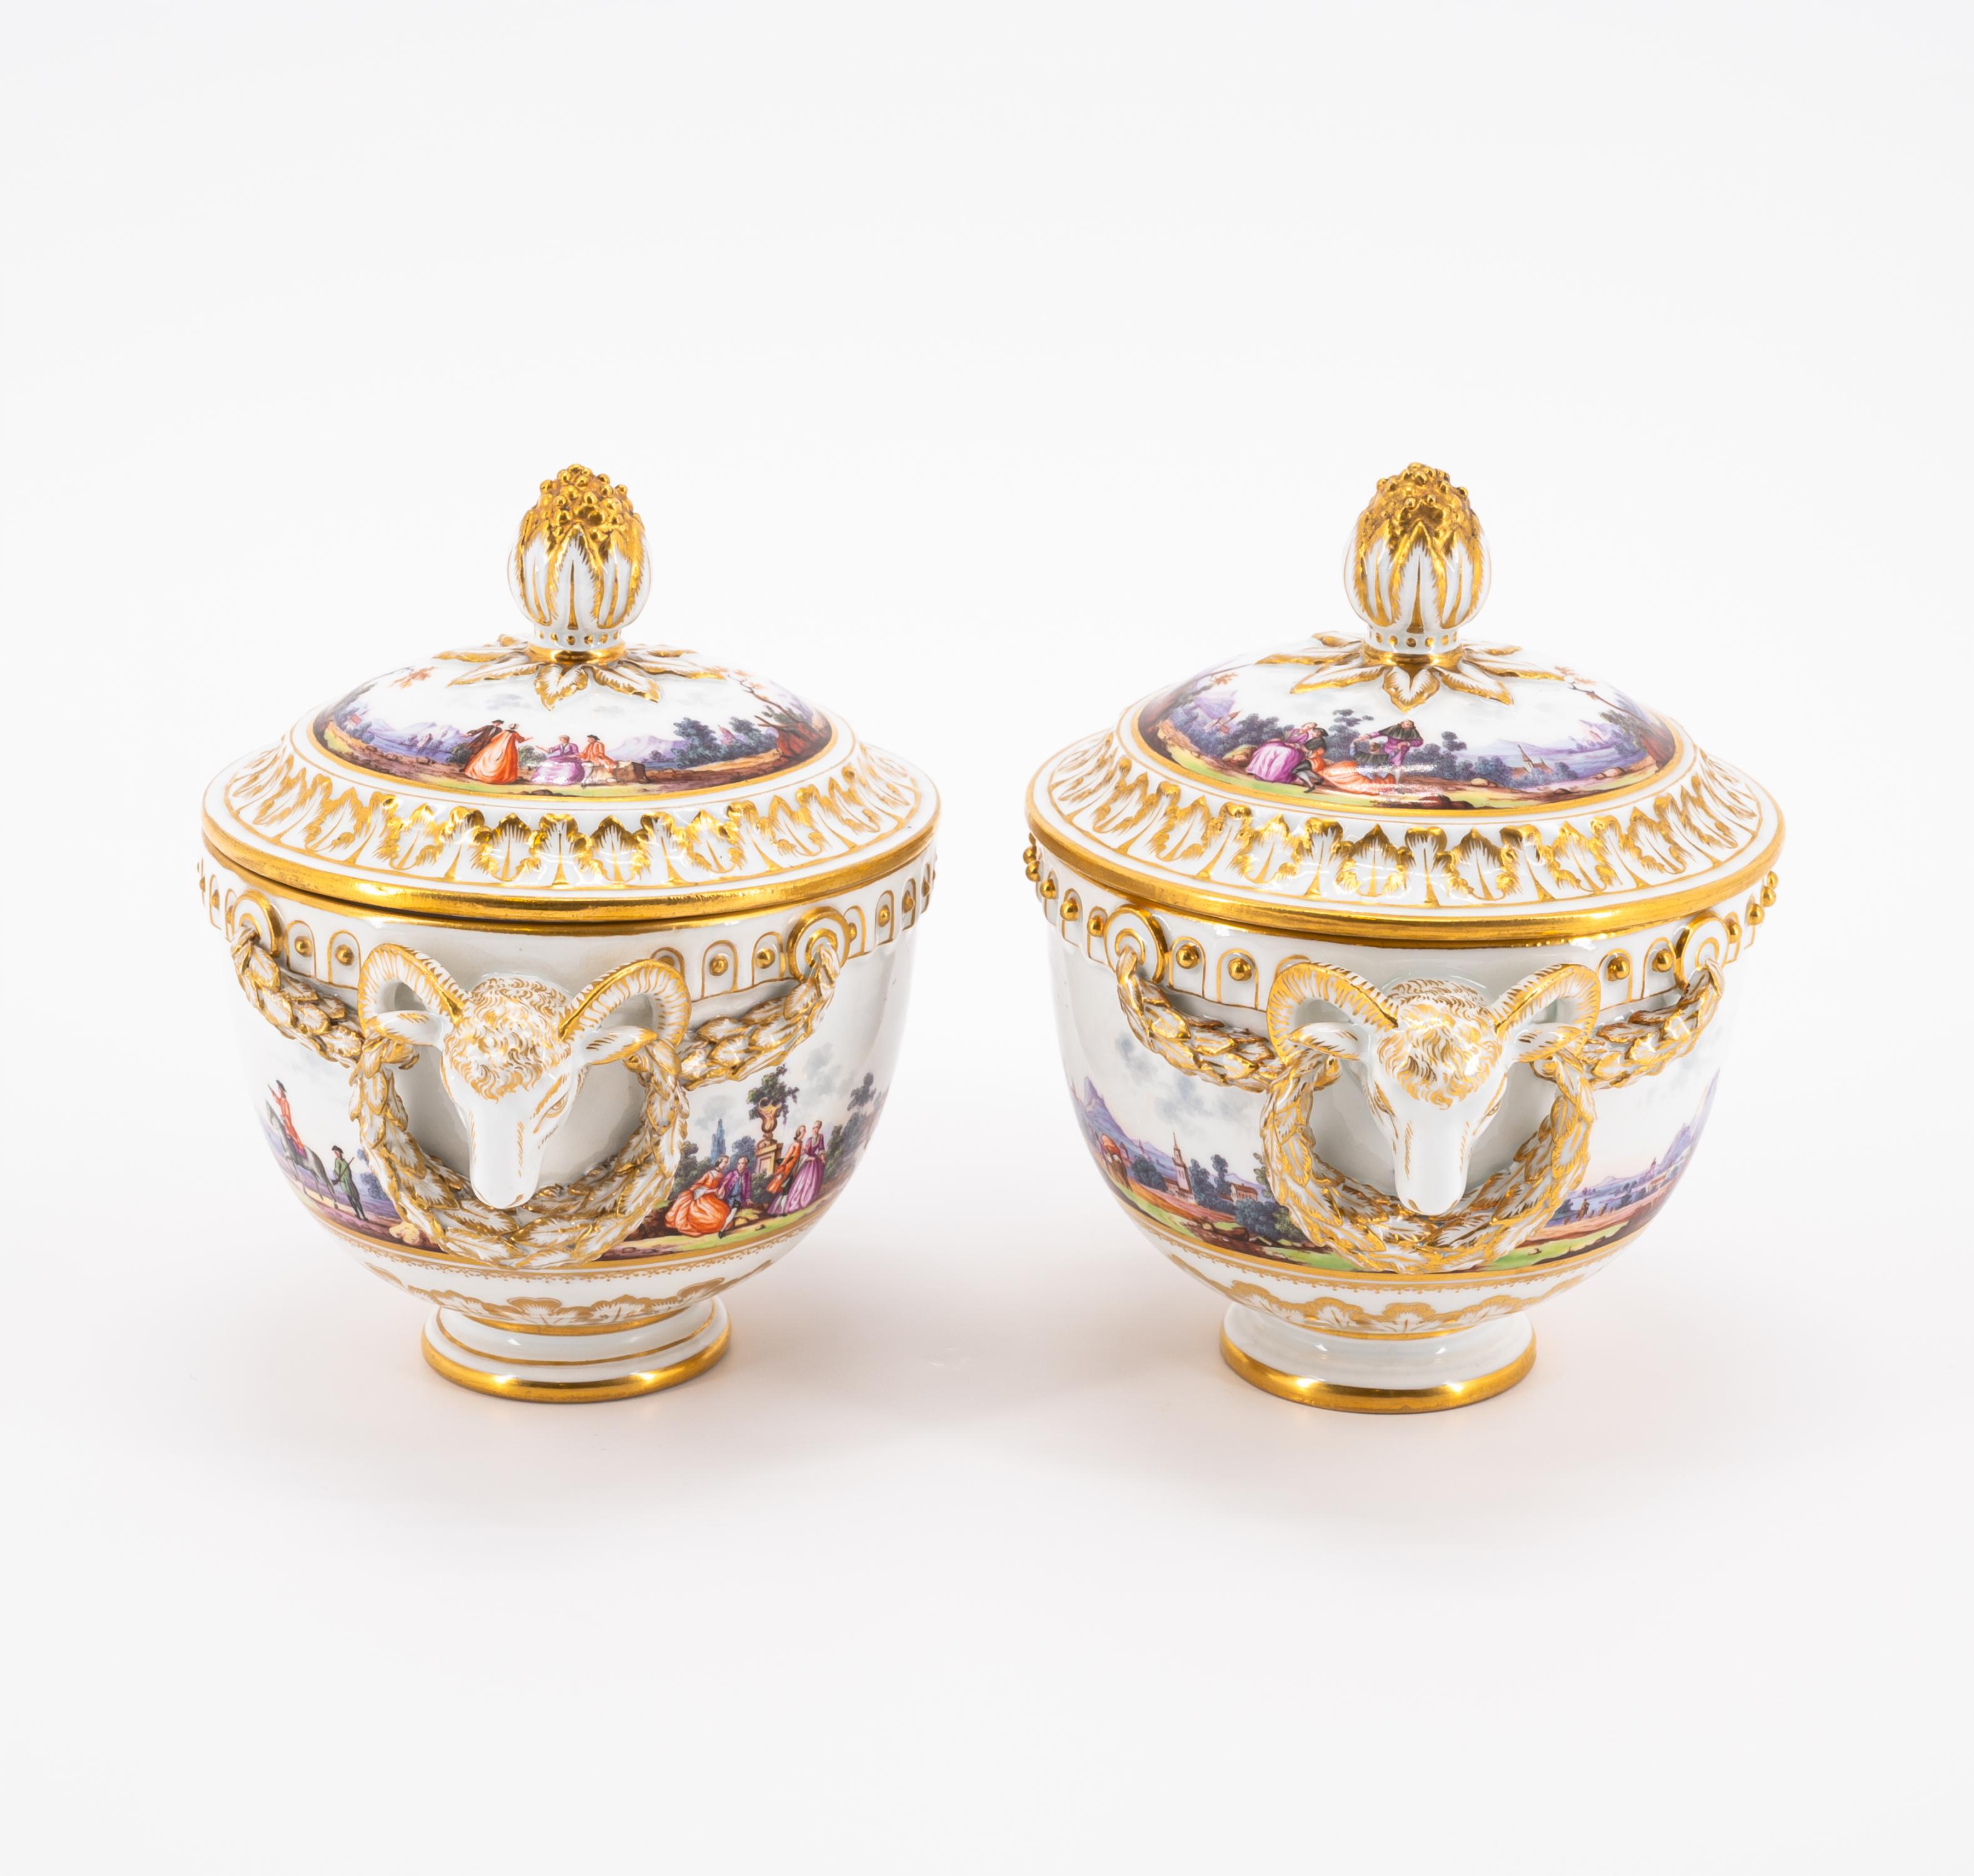 PAIR OF PORCELAIN LIDDED VESSELS WITH RAM DECORATION AND SURROUNDING LANDSCAPE PAINTINGS - Image 2 of 8